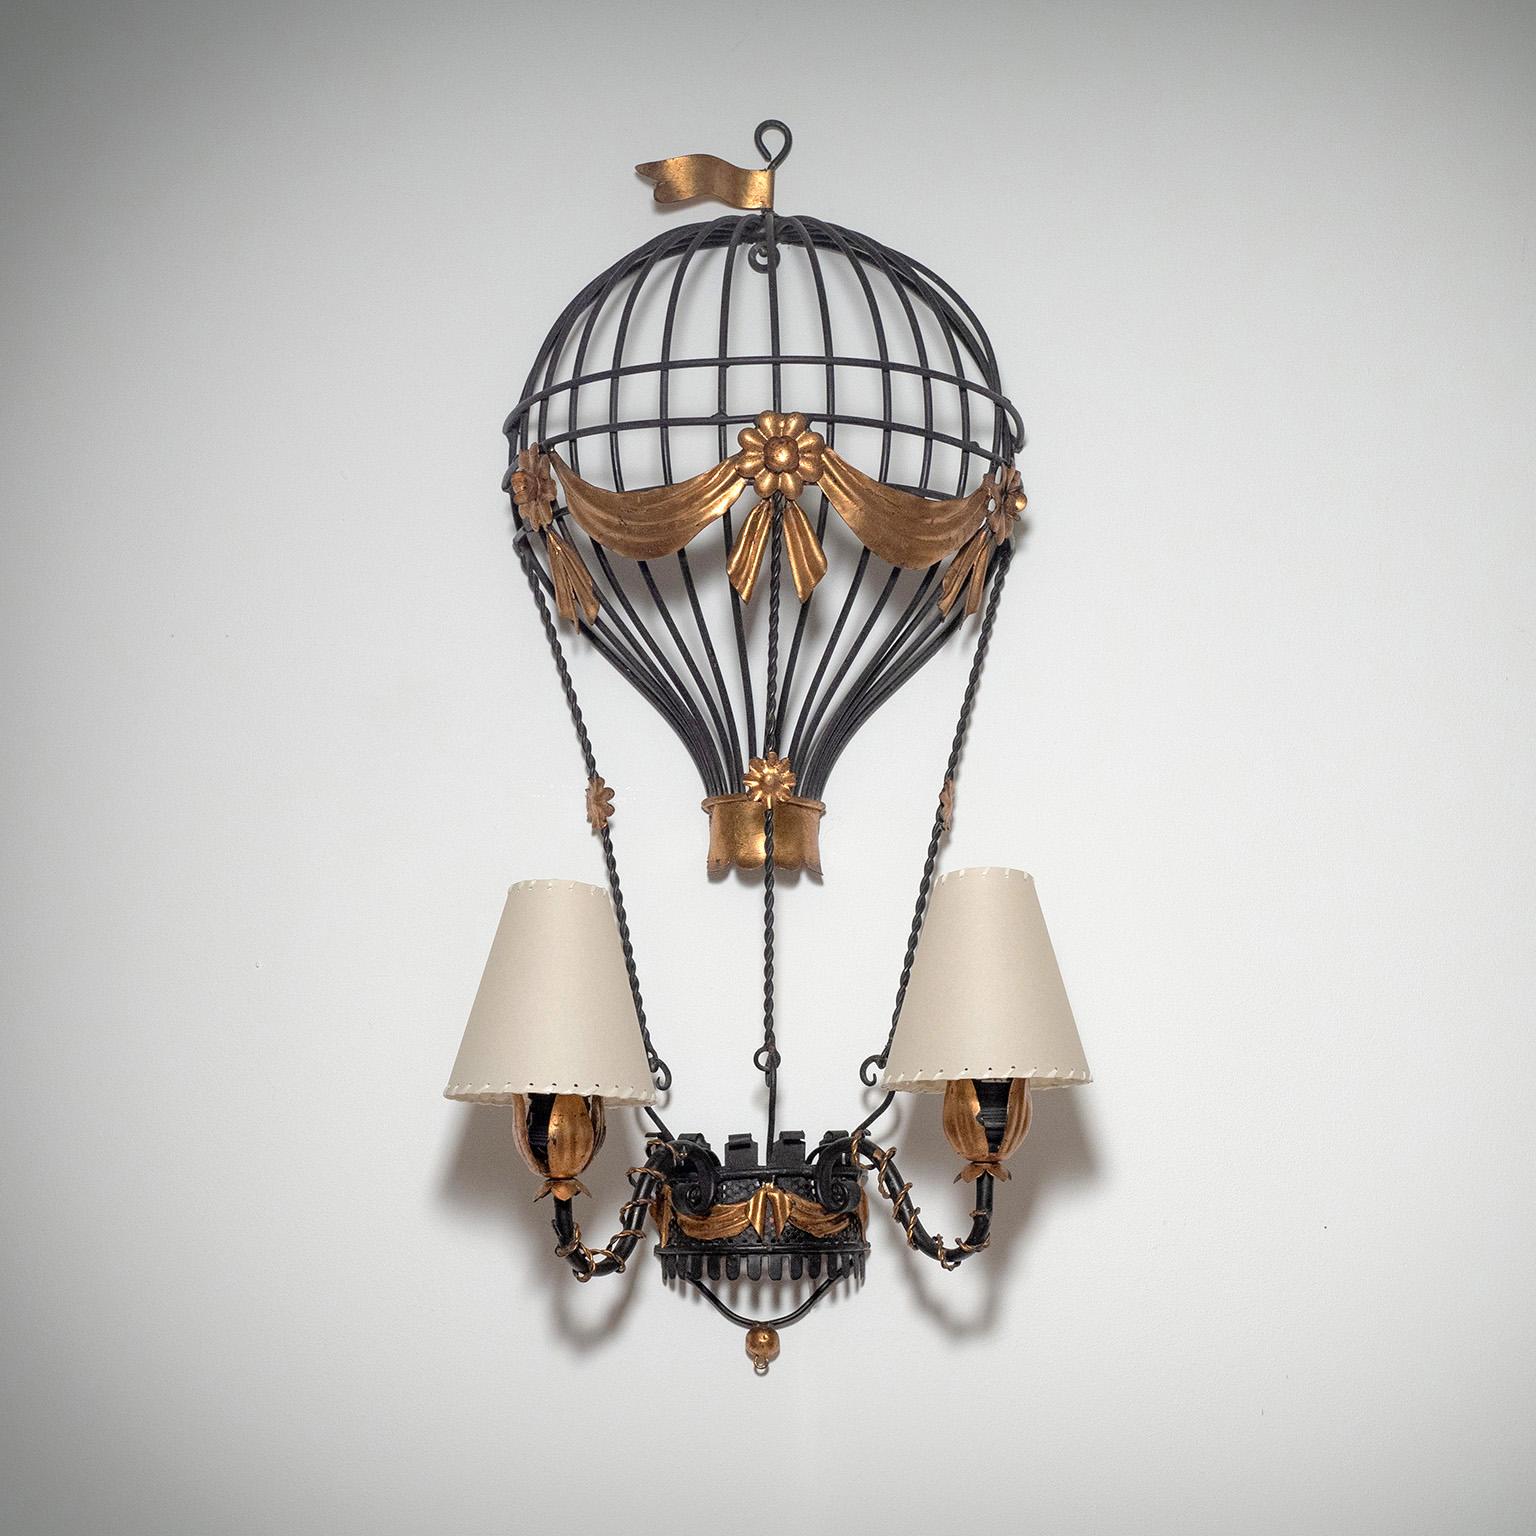 Very unique Italian wall light from the 1940-1950s in the shape of a Montgolfière (hot air ballon). Blackened forged iron with leaf metal decorations and new parchment-paper shades. Two original brass and ceramic E27 sockets with new